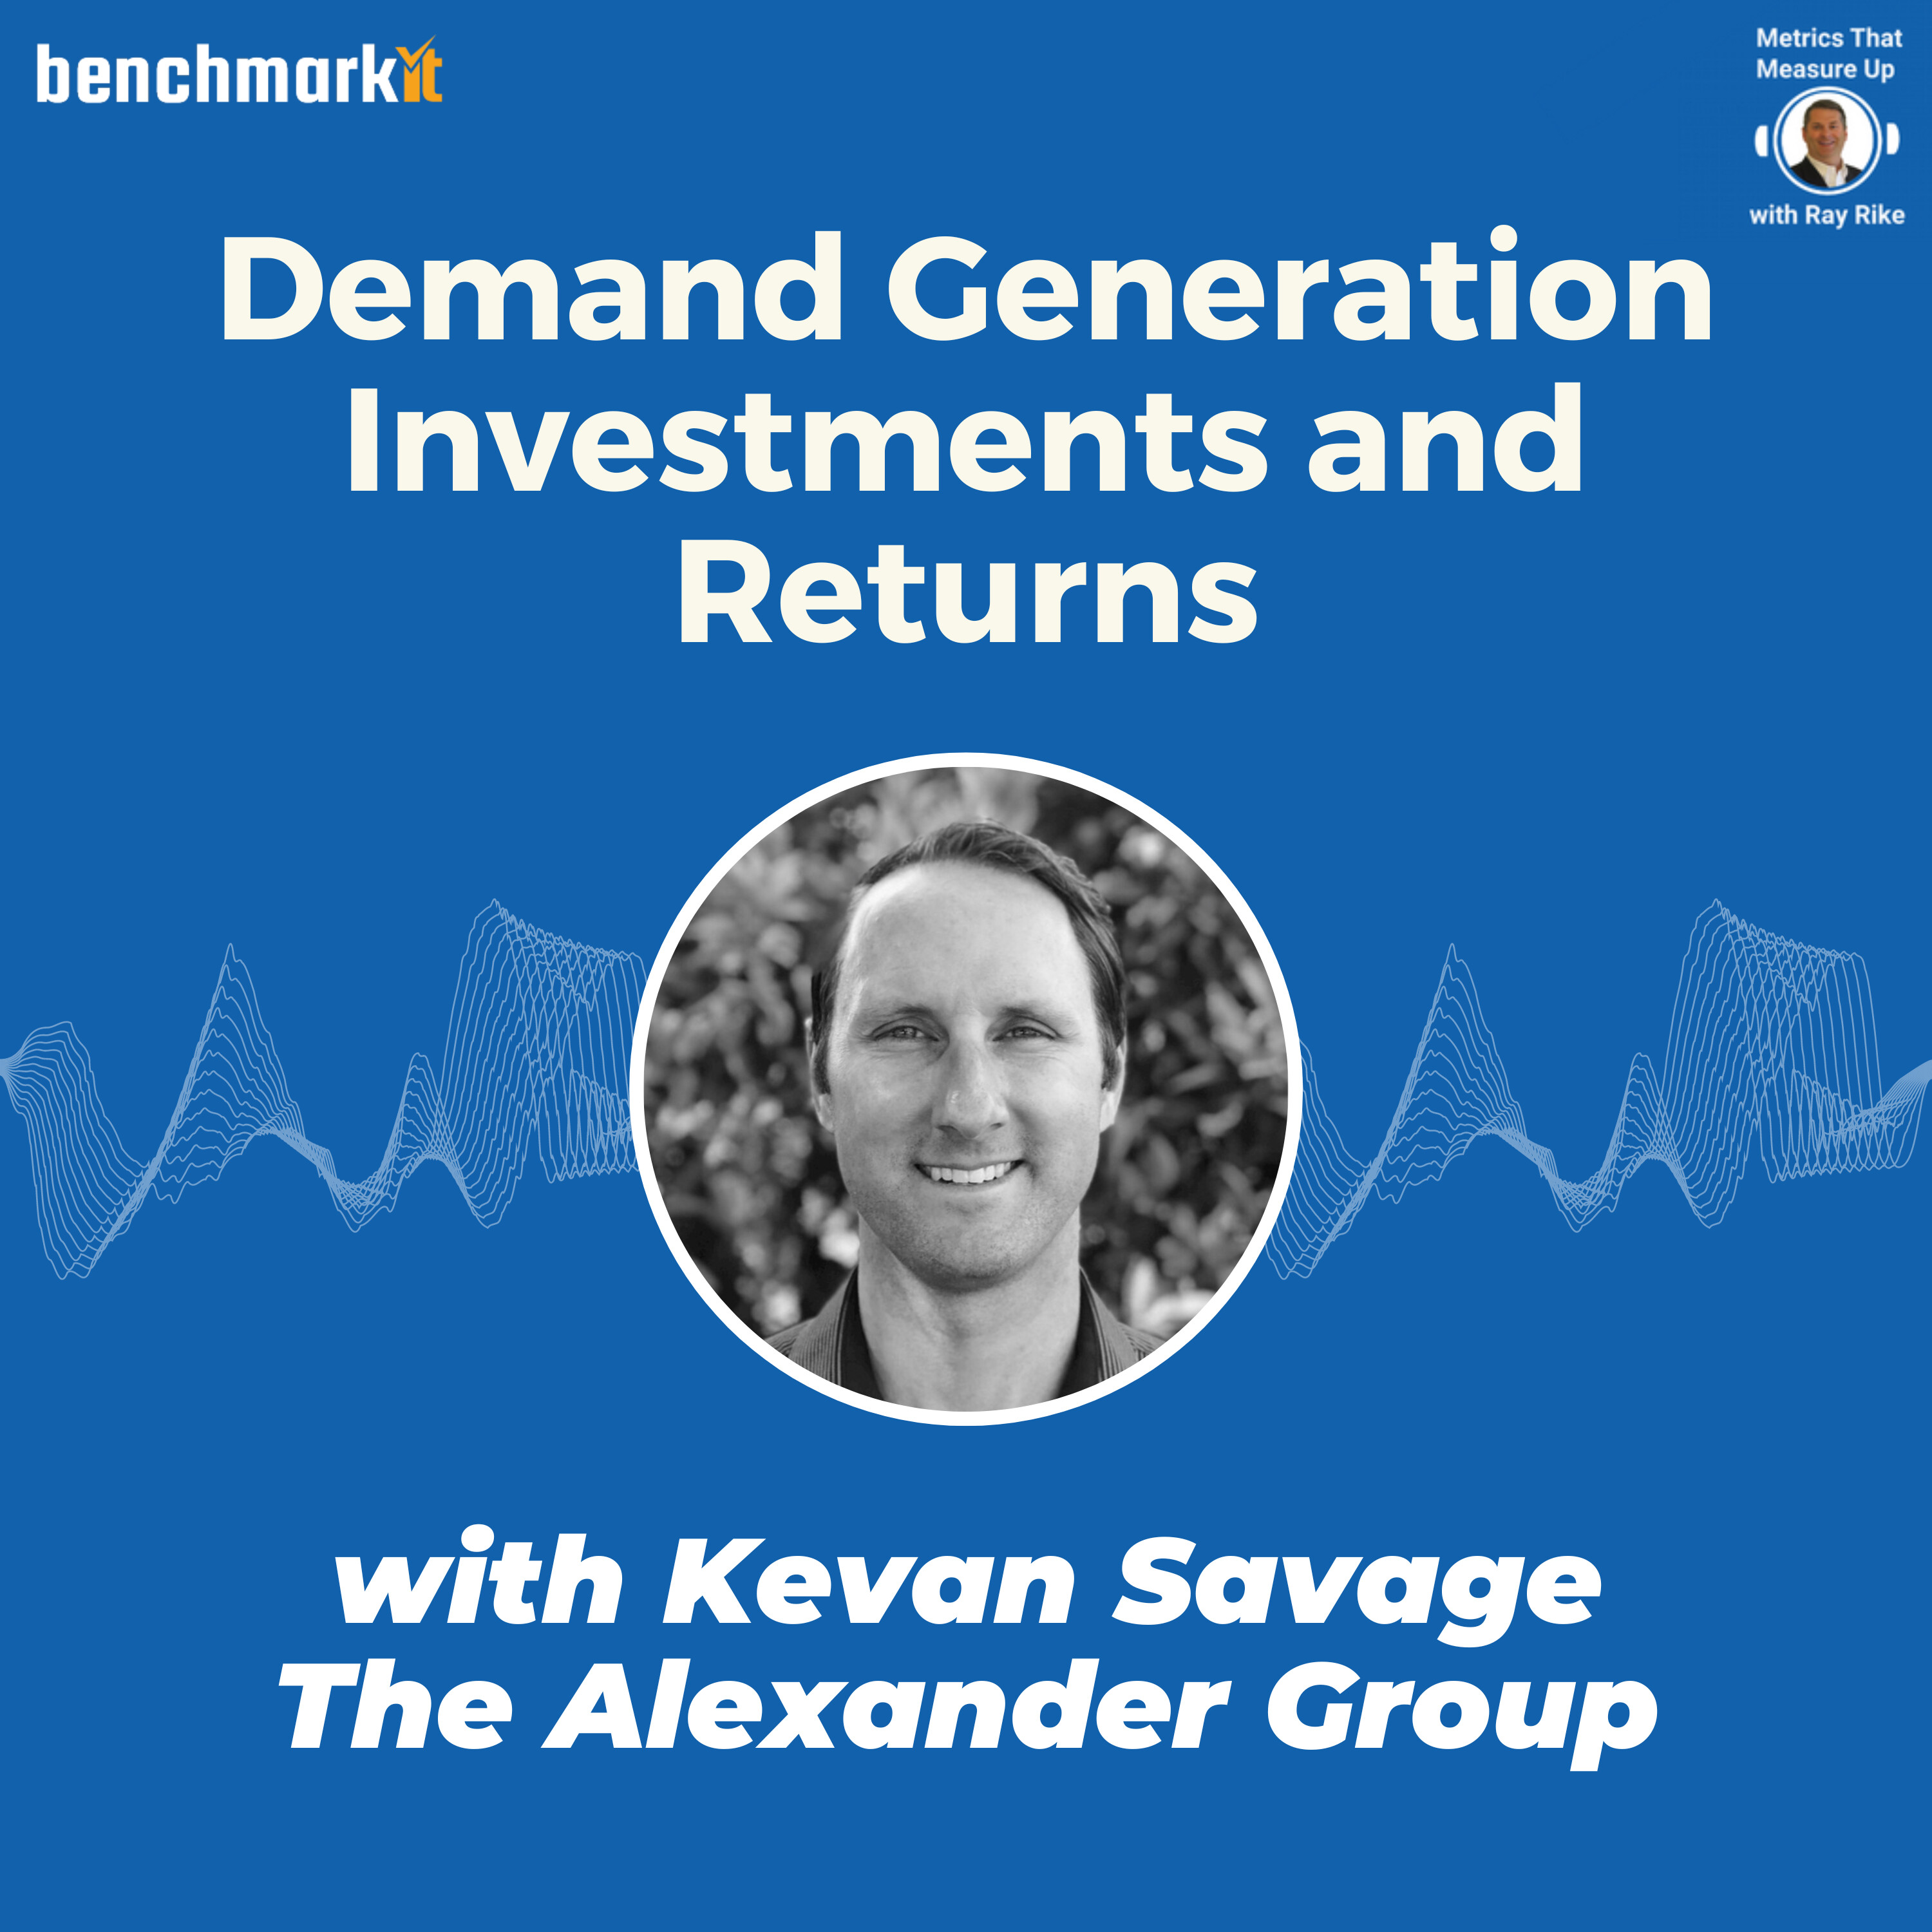 B2B Demand Generation Investment and Performance Trends - with Kevan Savage, The Alexander Group